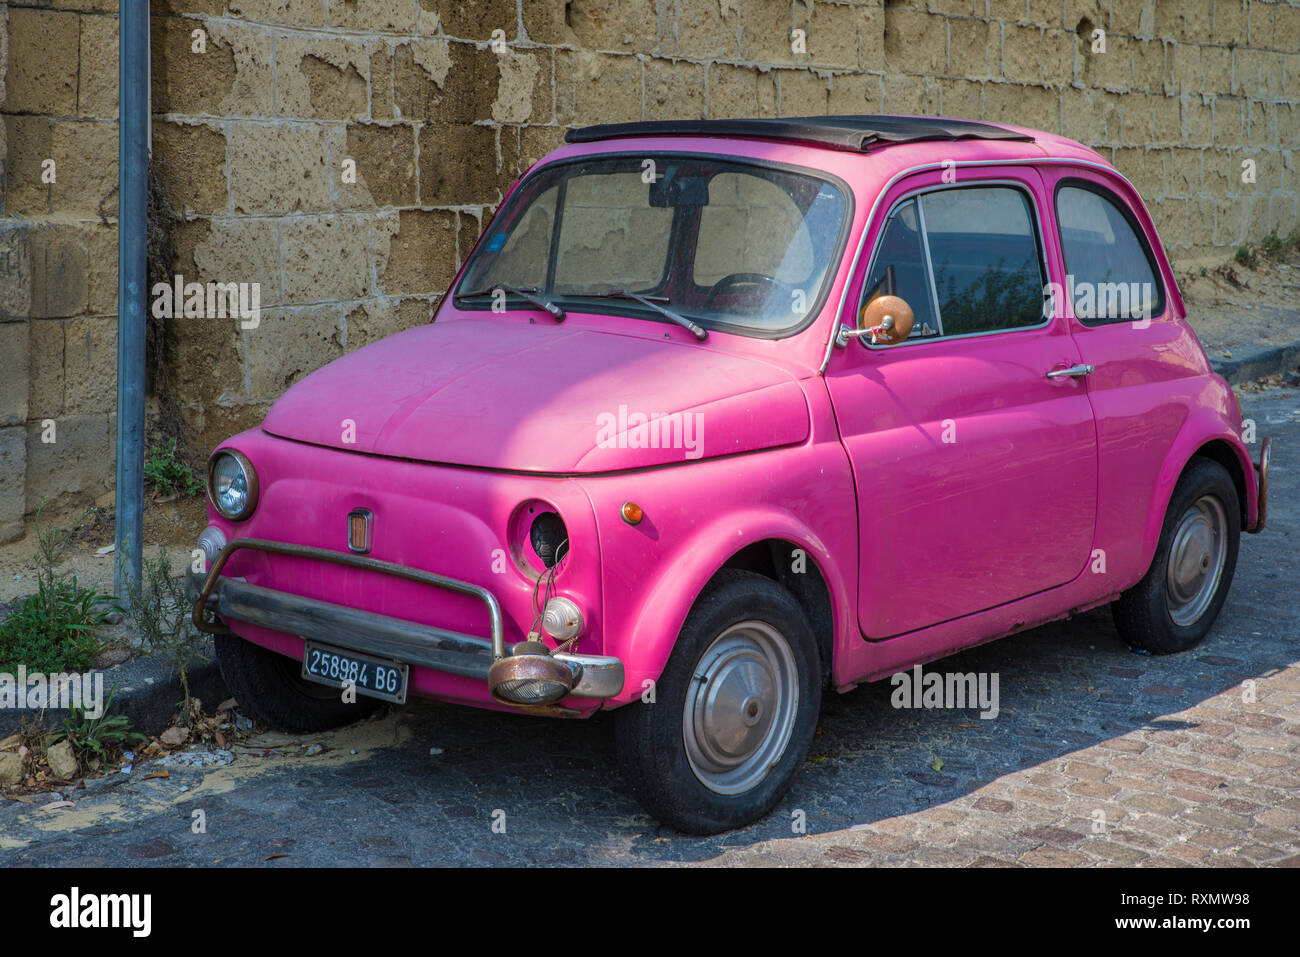 Naples Italy August 14 15 Oldtimer Pink Fiat Nuova 500 Car Stands On The Streets Of Naples His Headlights Are Broken Stock Photo Alamy